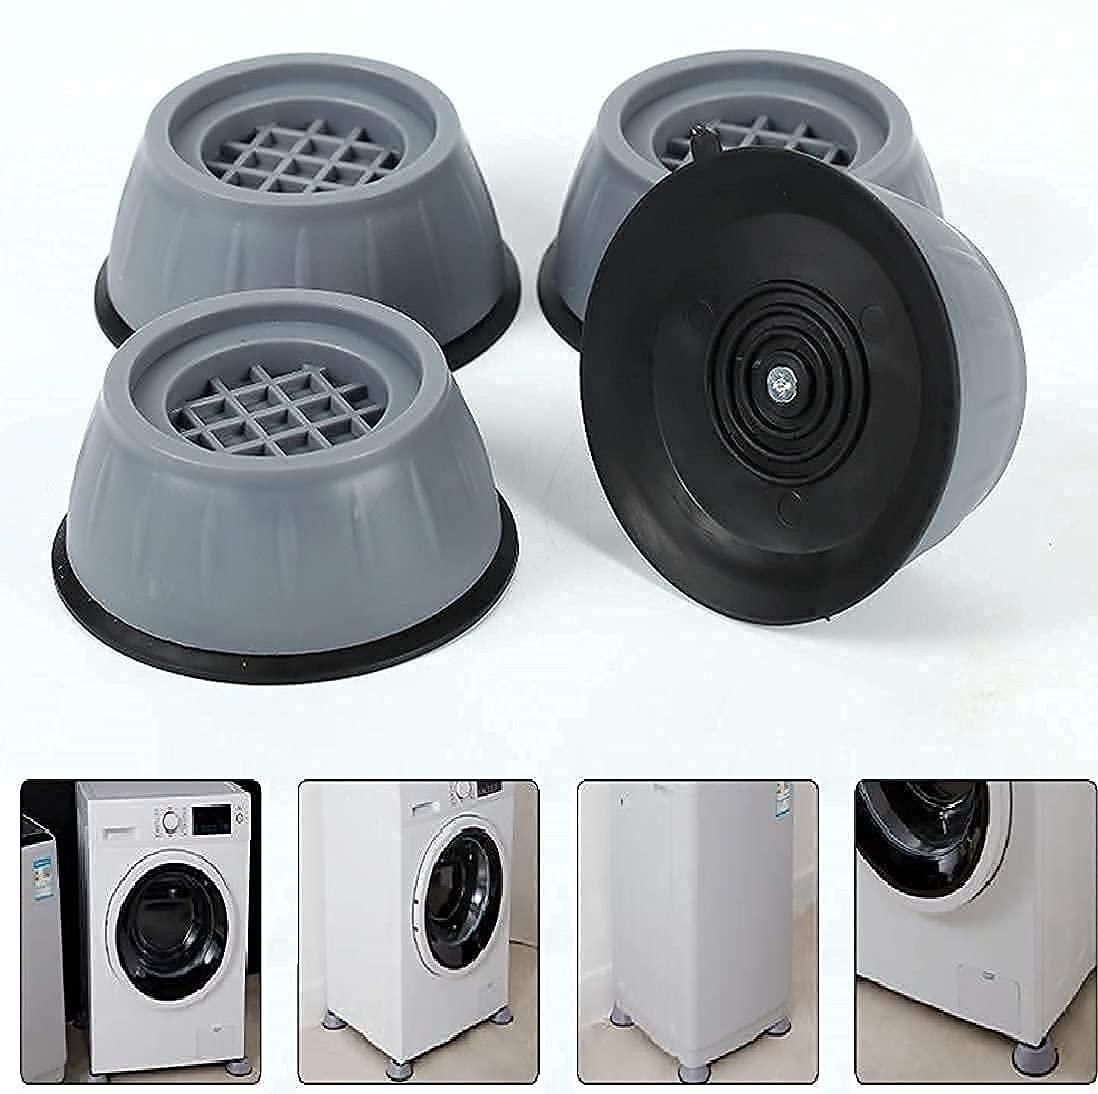 Anti Vibration Pad-Anti-vibration Pads For Washing Machine - 4 Pcs Shock Proof Feet For Washer ? Dryer, Great For Home, Laundry Room, Kitchen, Washer, Dryer, Table, Chair, Sofa, Bed (4 Units) - Premium  from Roposo Clout - Just $500! Shop now at Mystical9